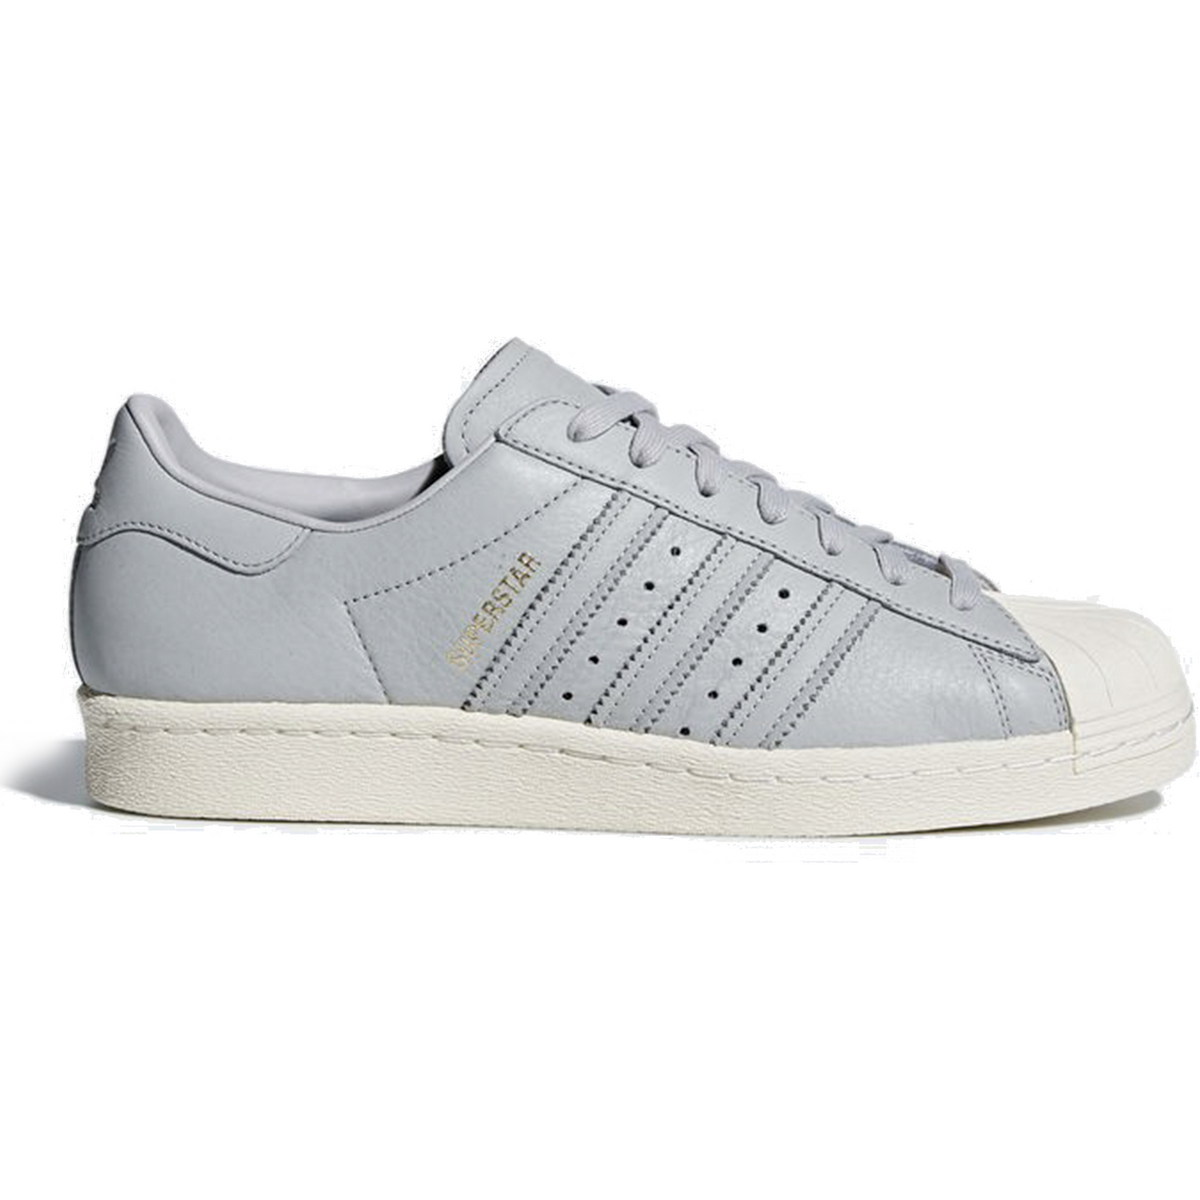 Adidas Superstar 80s Shoes - Grey / Red / Blue — Just For Sports